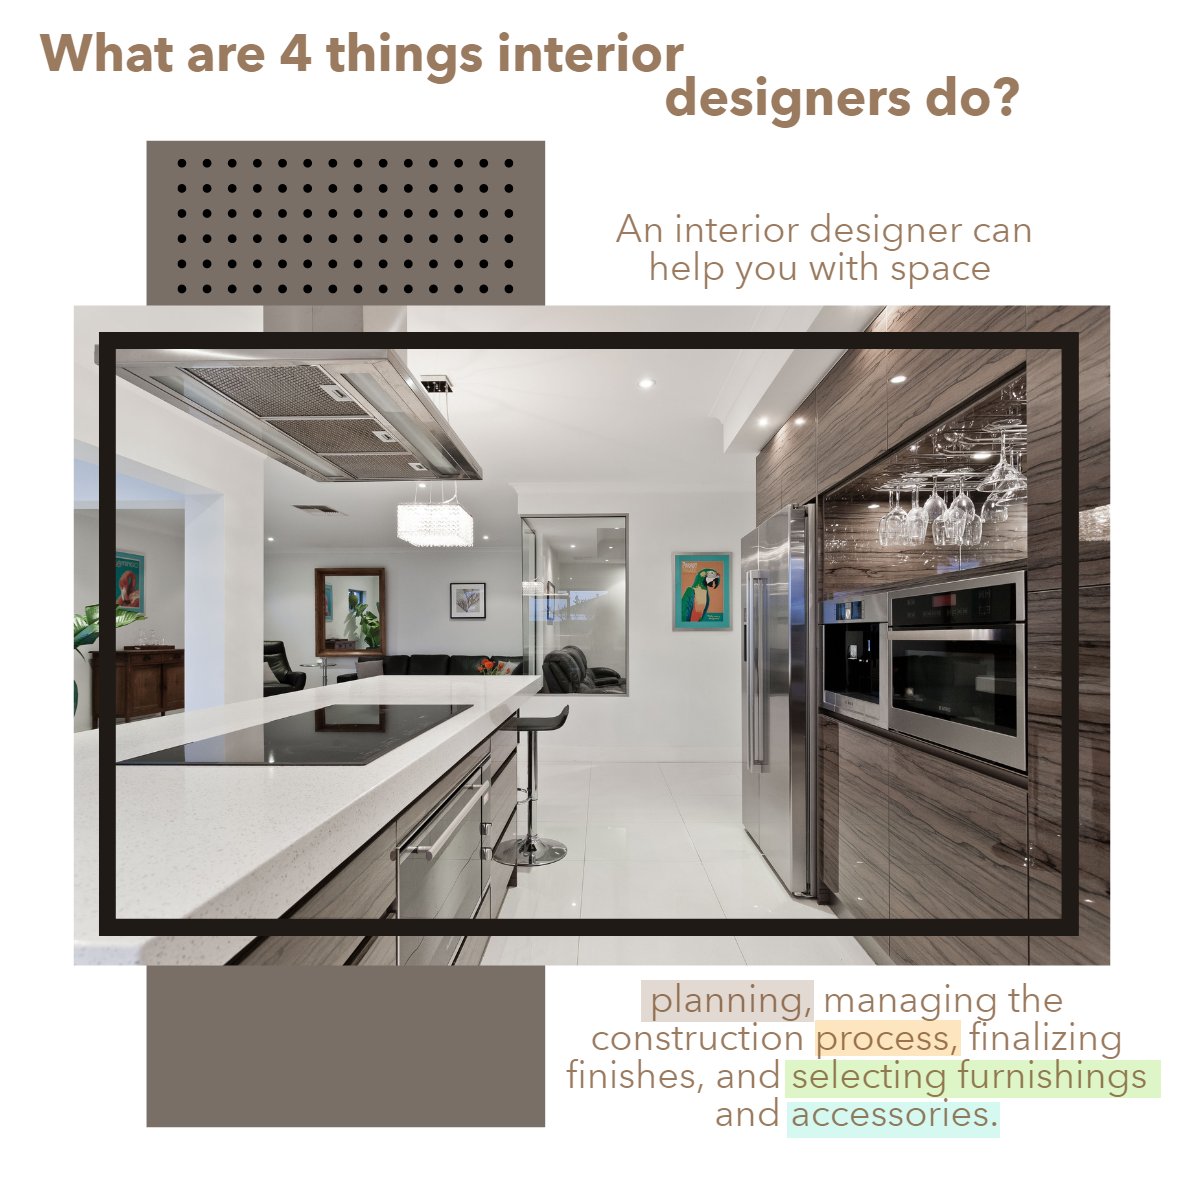 Have you ever worked with an interior designer?

Share your experience!

#interiordesigner     #interiordesigns     #didyouknow